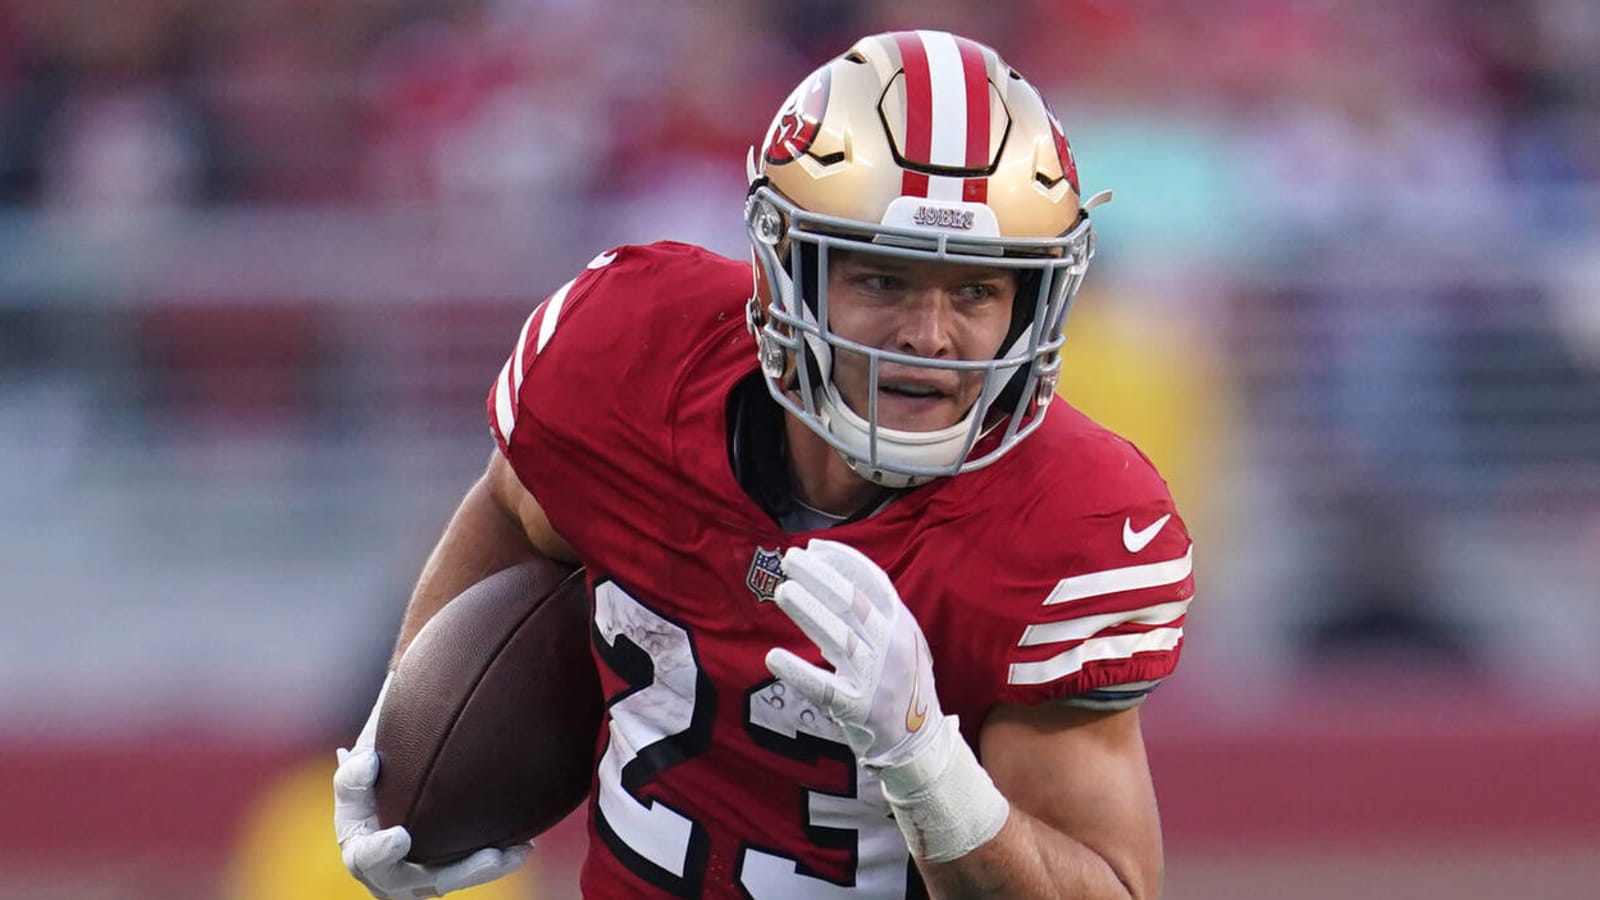 Watch: Christian McCaffrey scores for the 12th straight game, tying 49ers mark